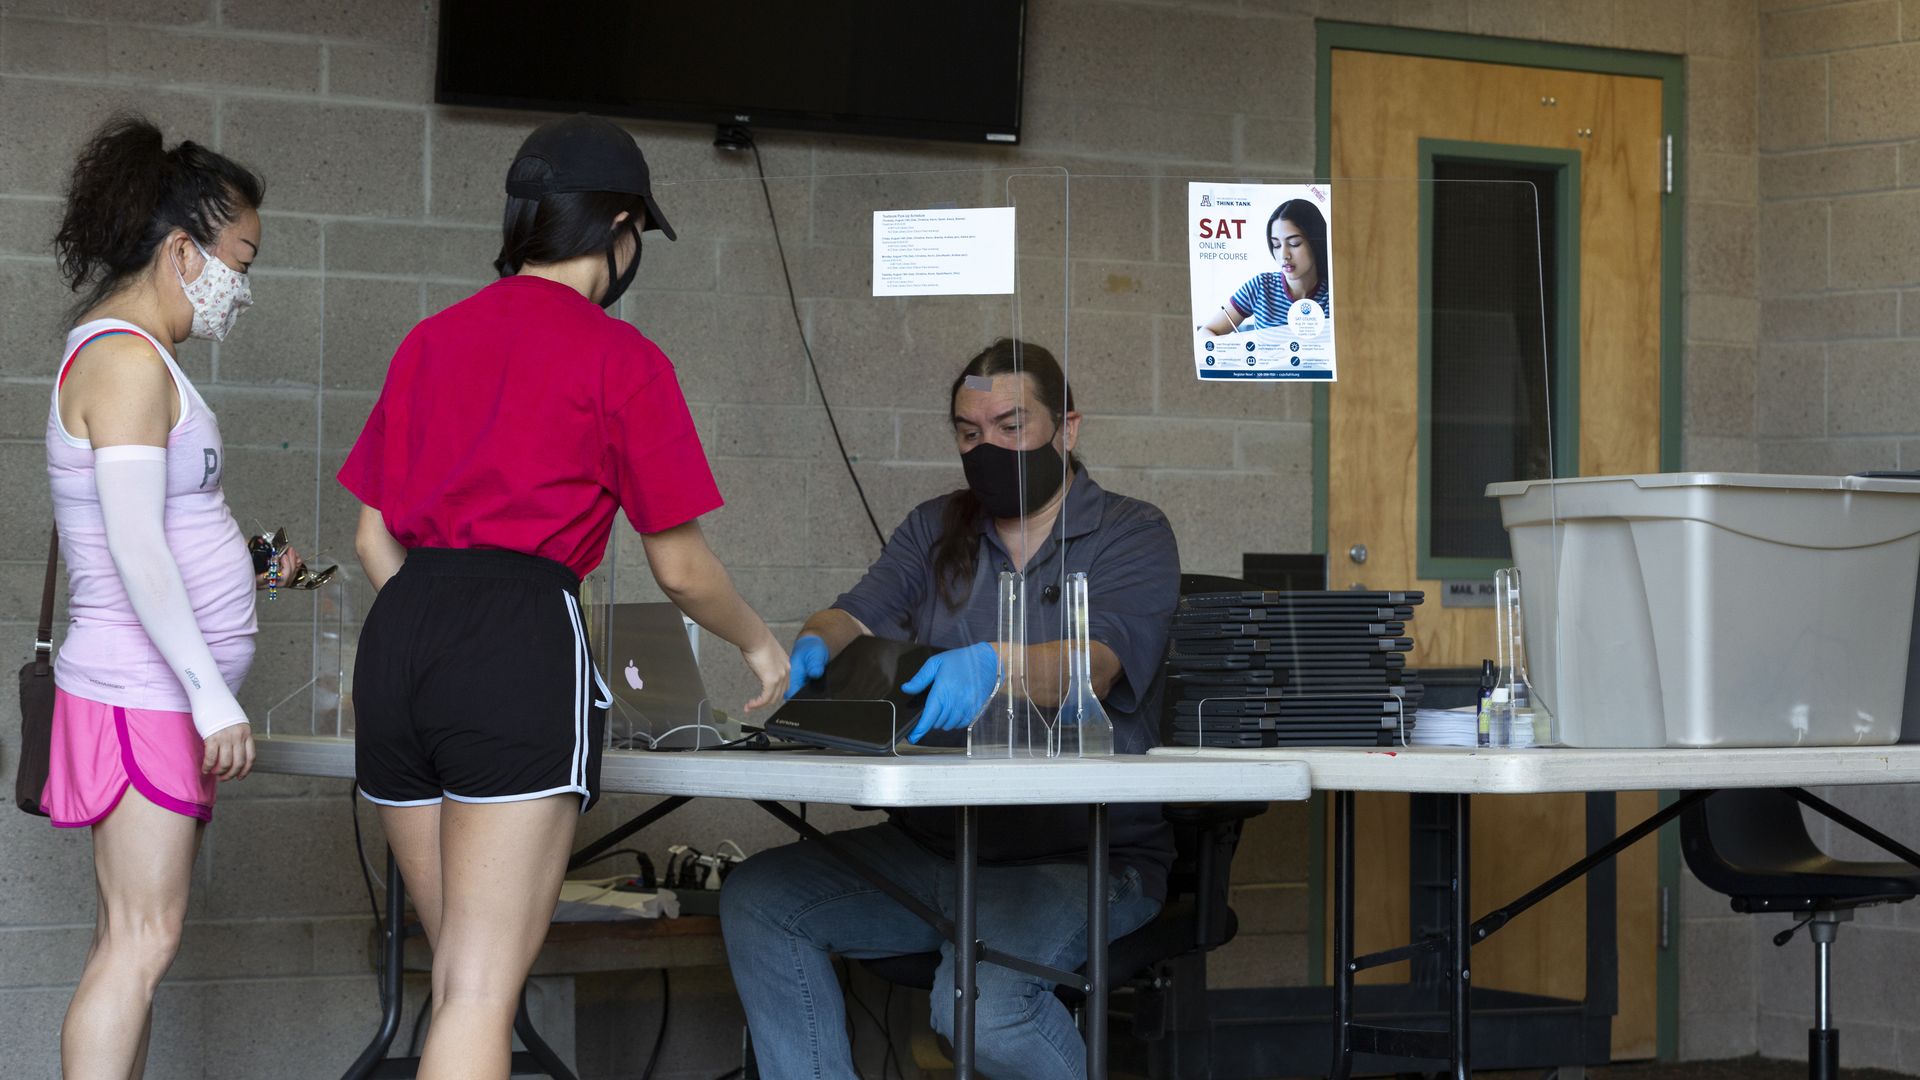 An employee wearing a protective mask distributes laptop computers to students at Catalina Foothills High School in Tucson, Arizona, U.S., on Friday, Aug. 14, 2020.